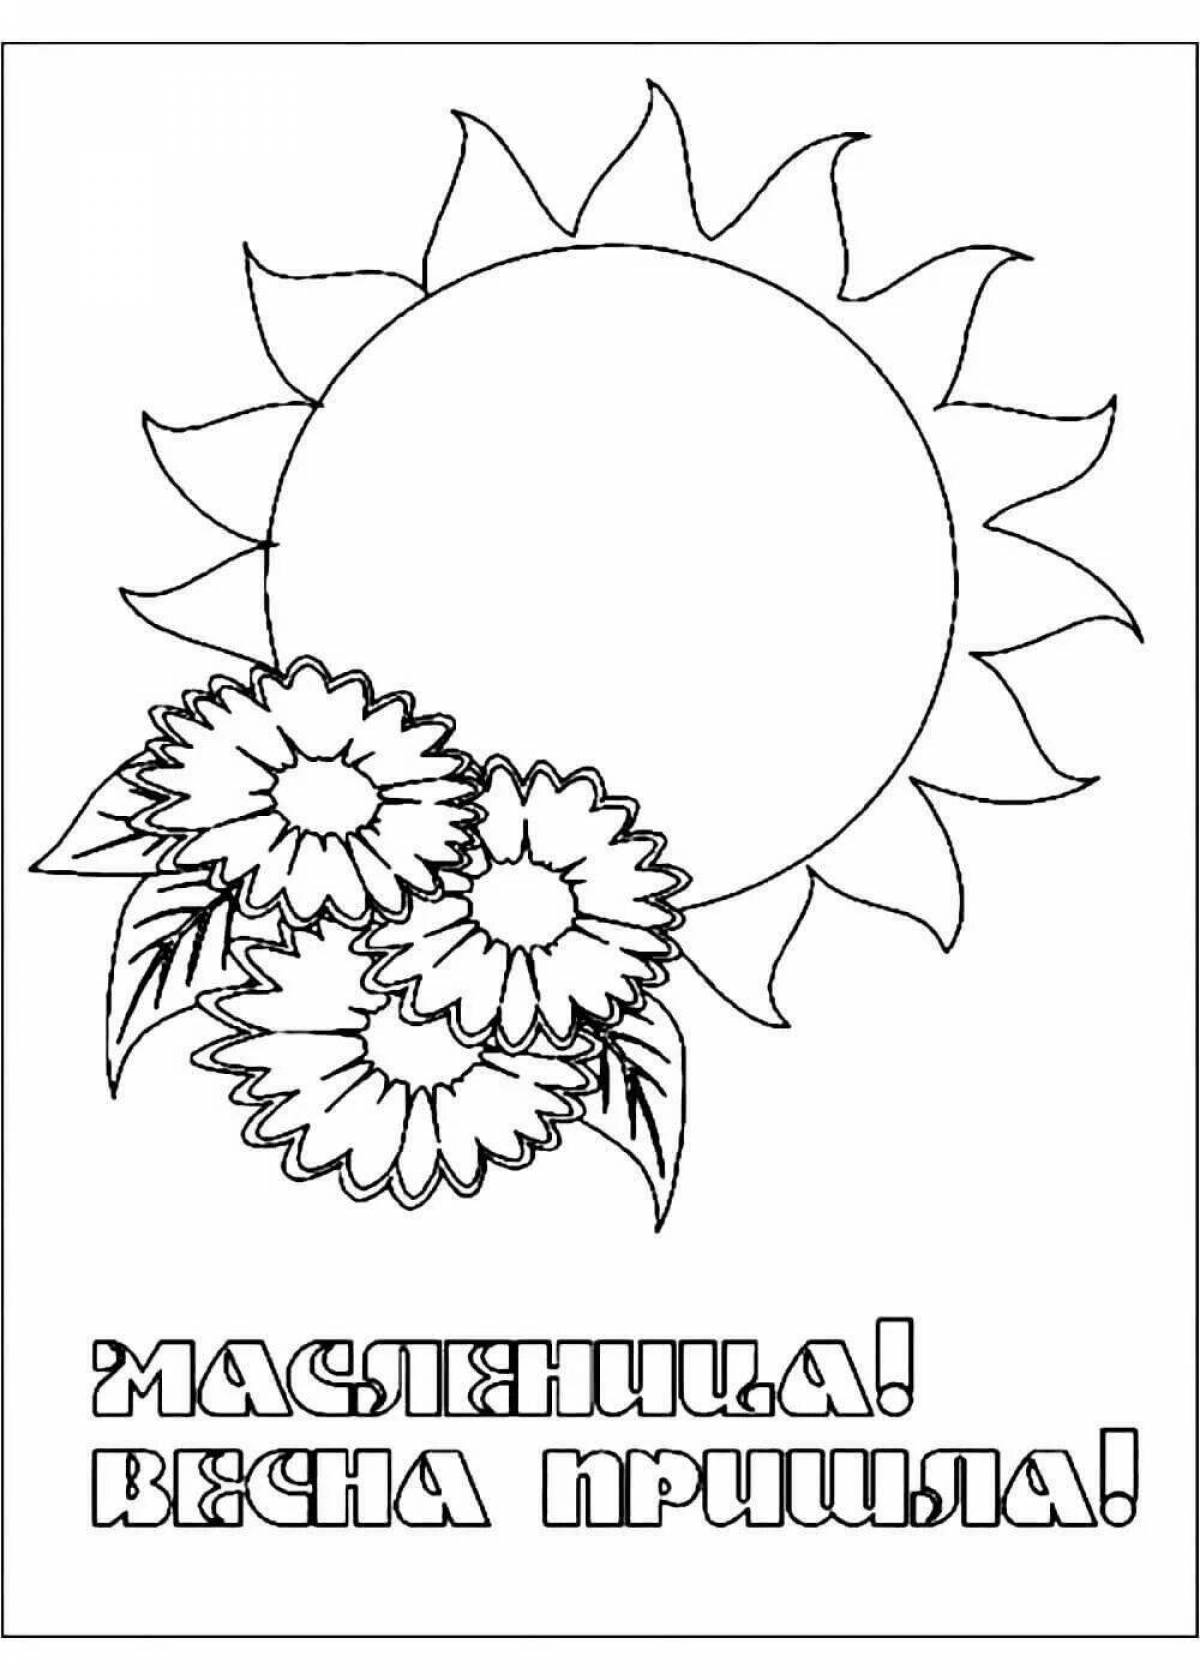 Adorable carnival coloring book for kids